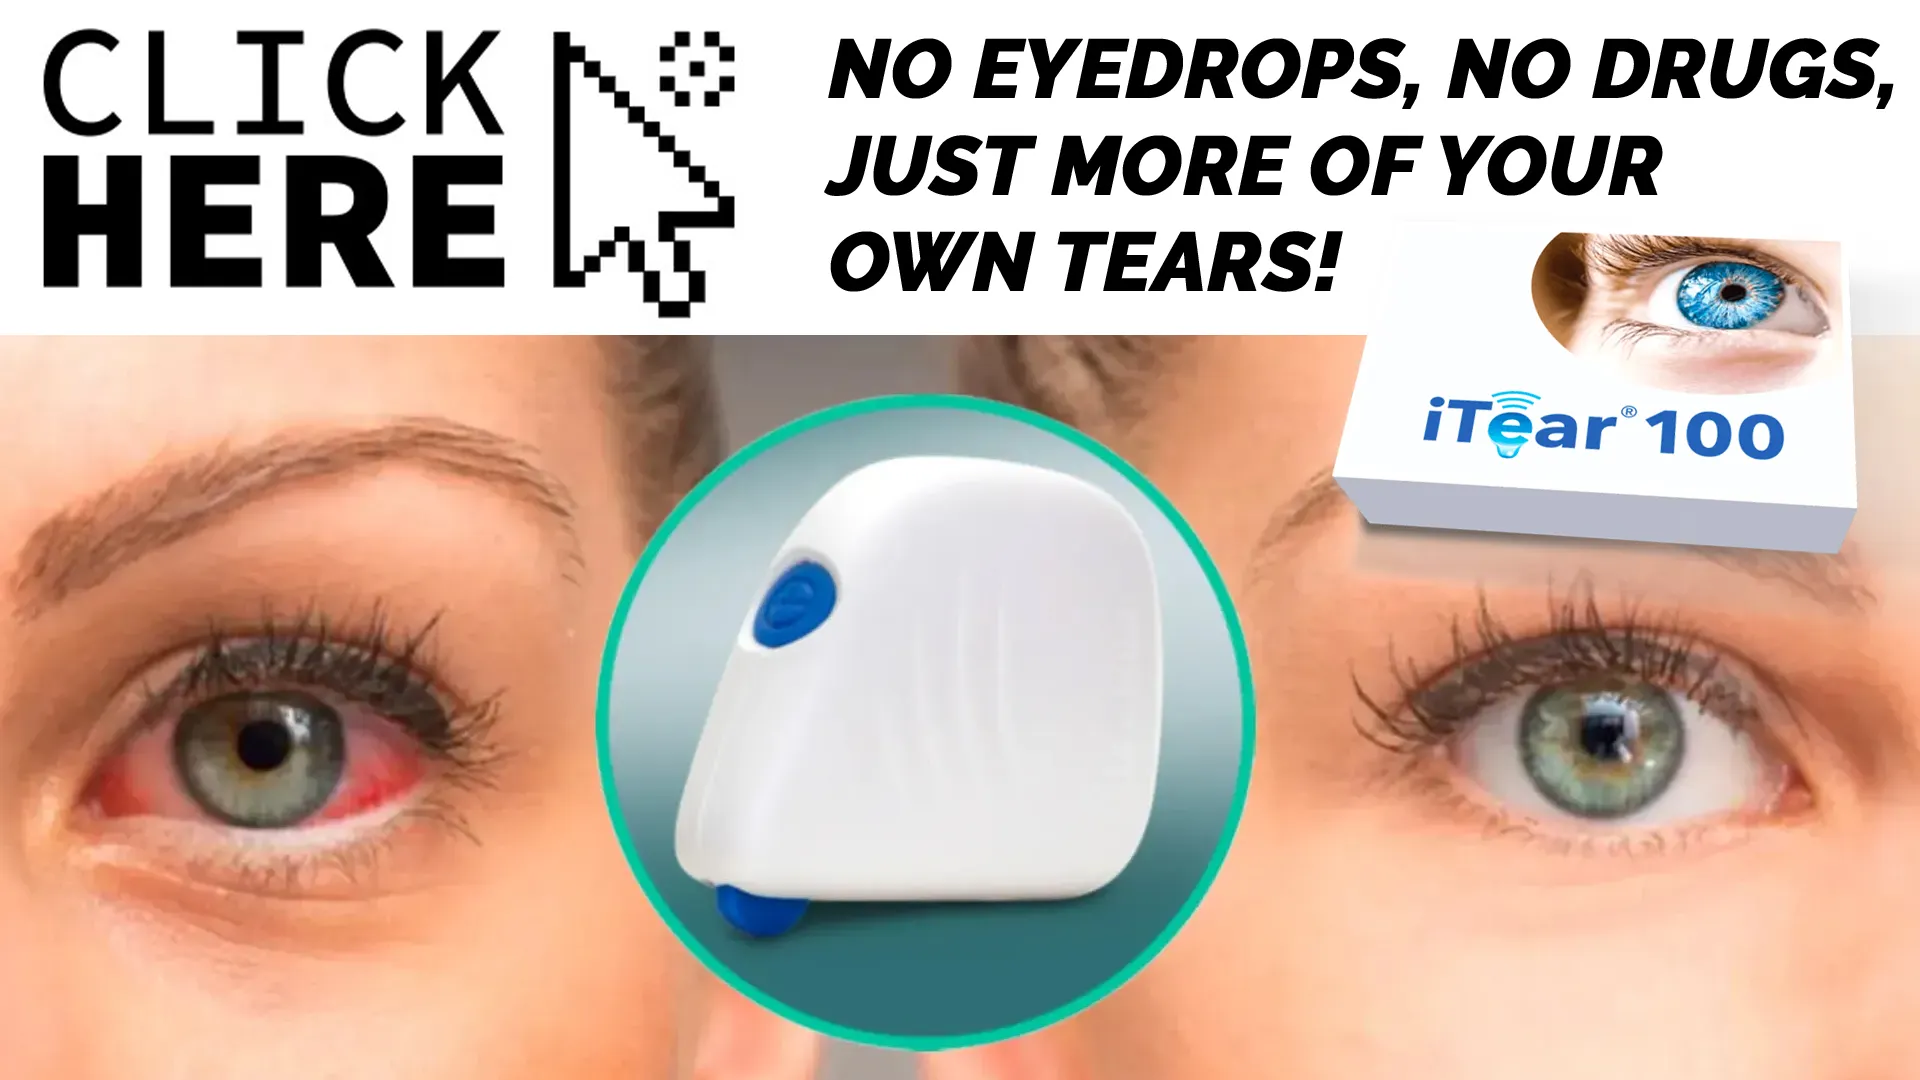 Call Now and Say Goodbye to Dry Eyes